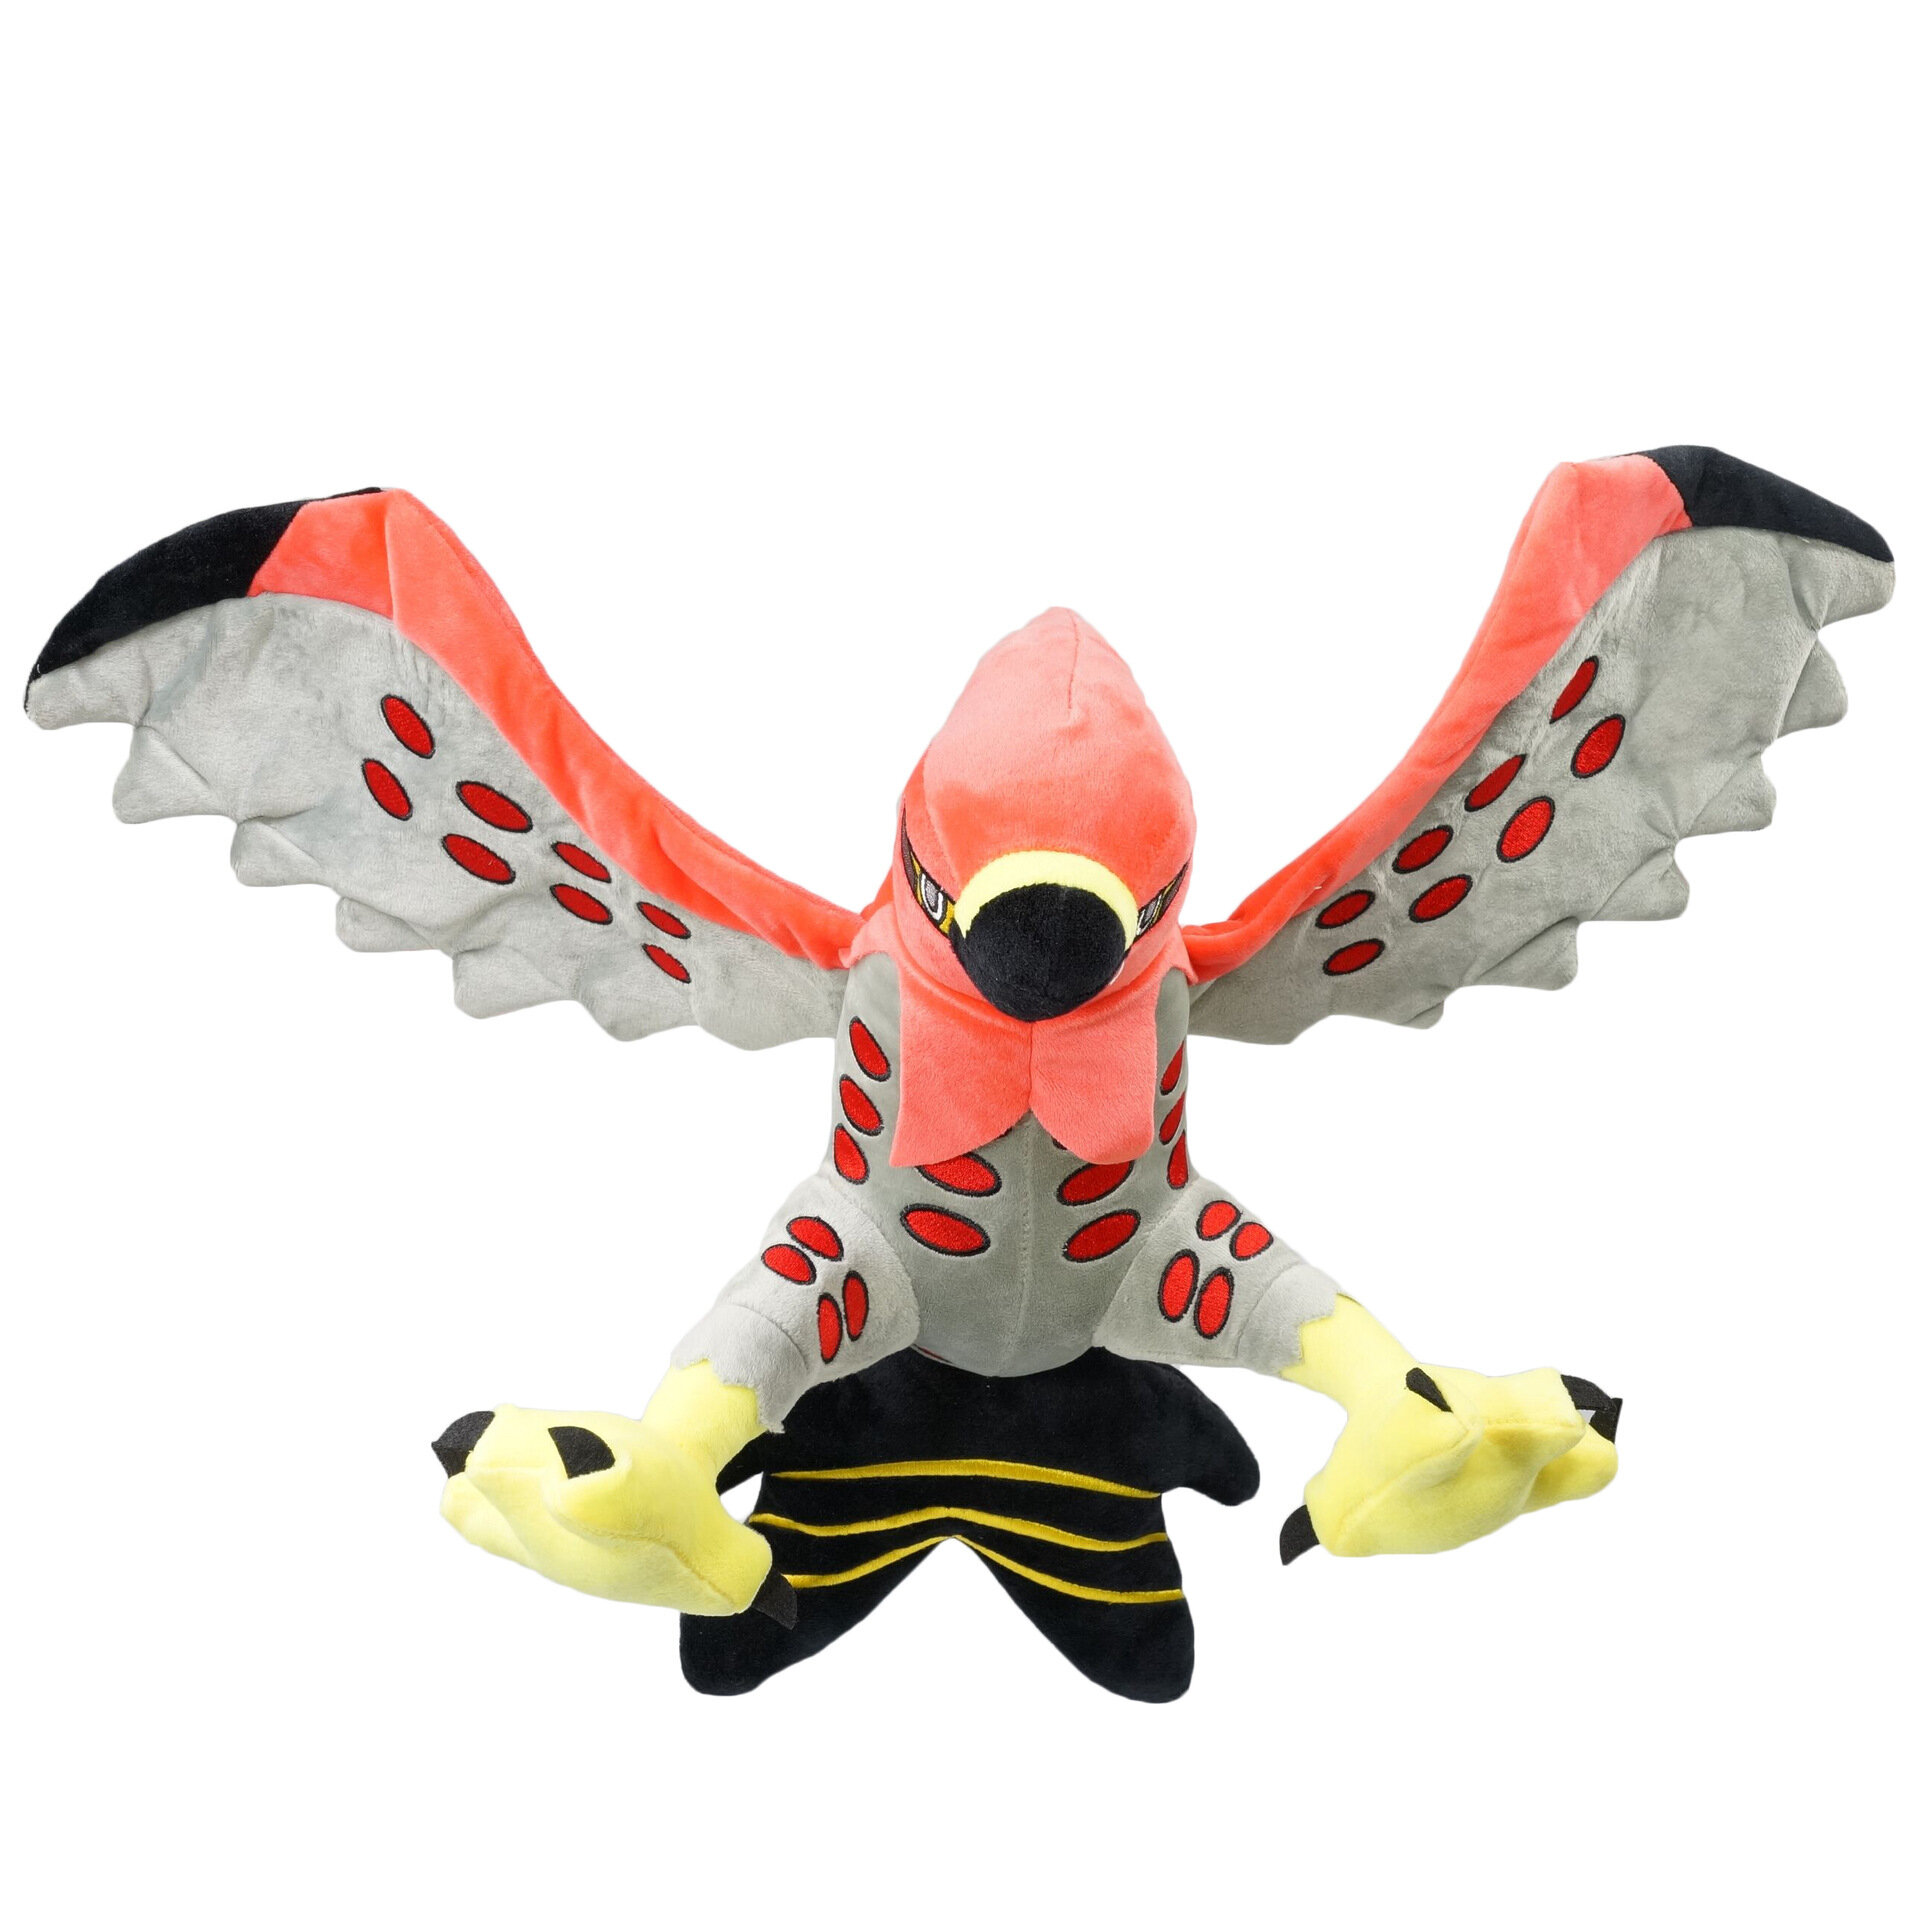 Talonflame Plush Toy Doll Figure